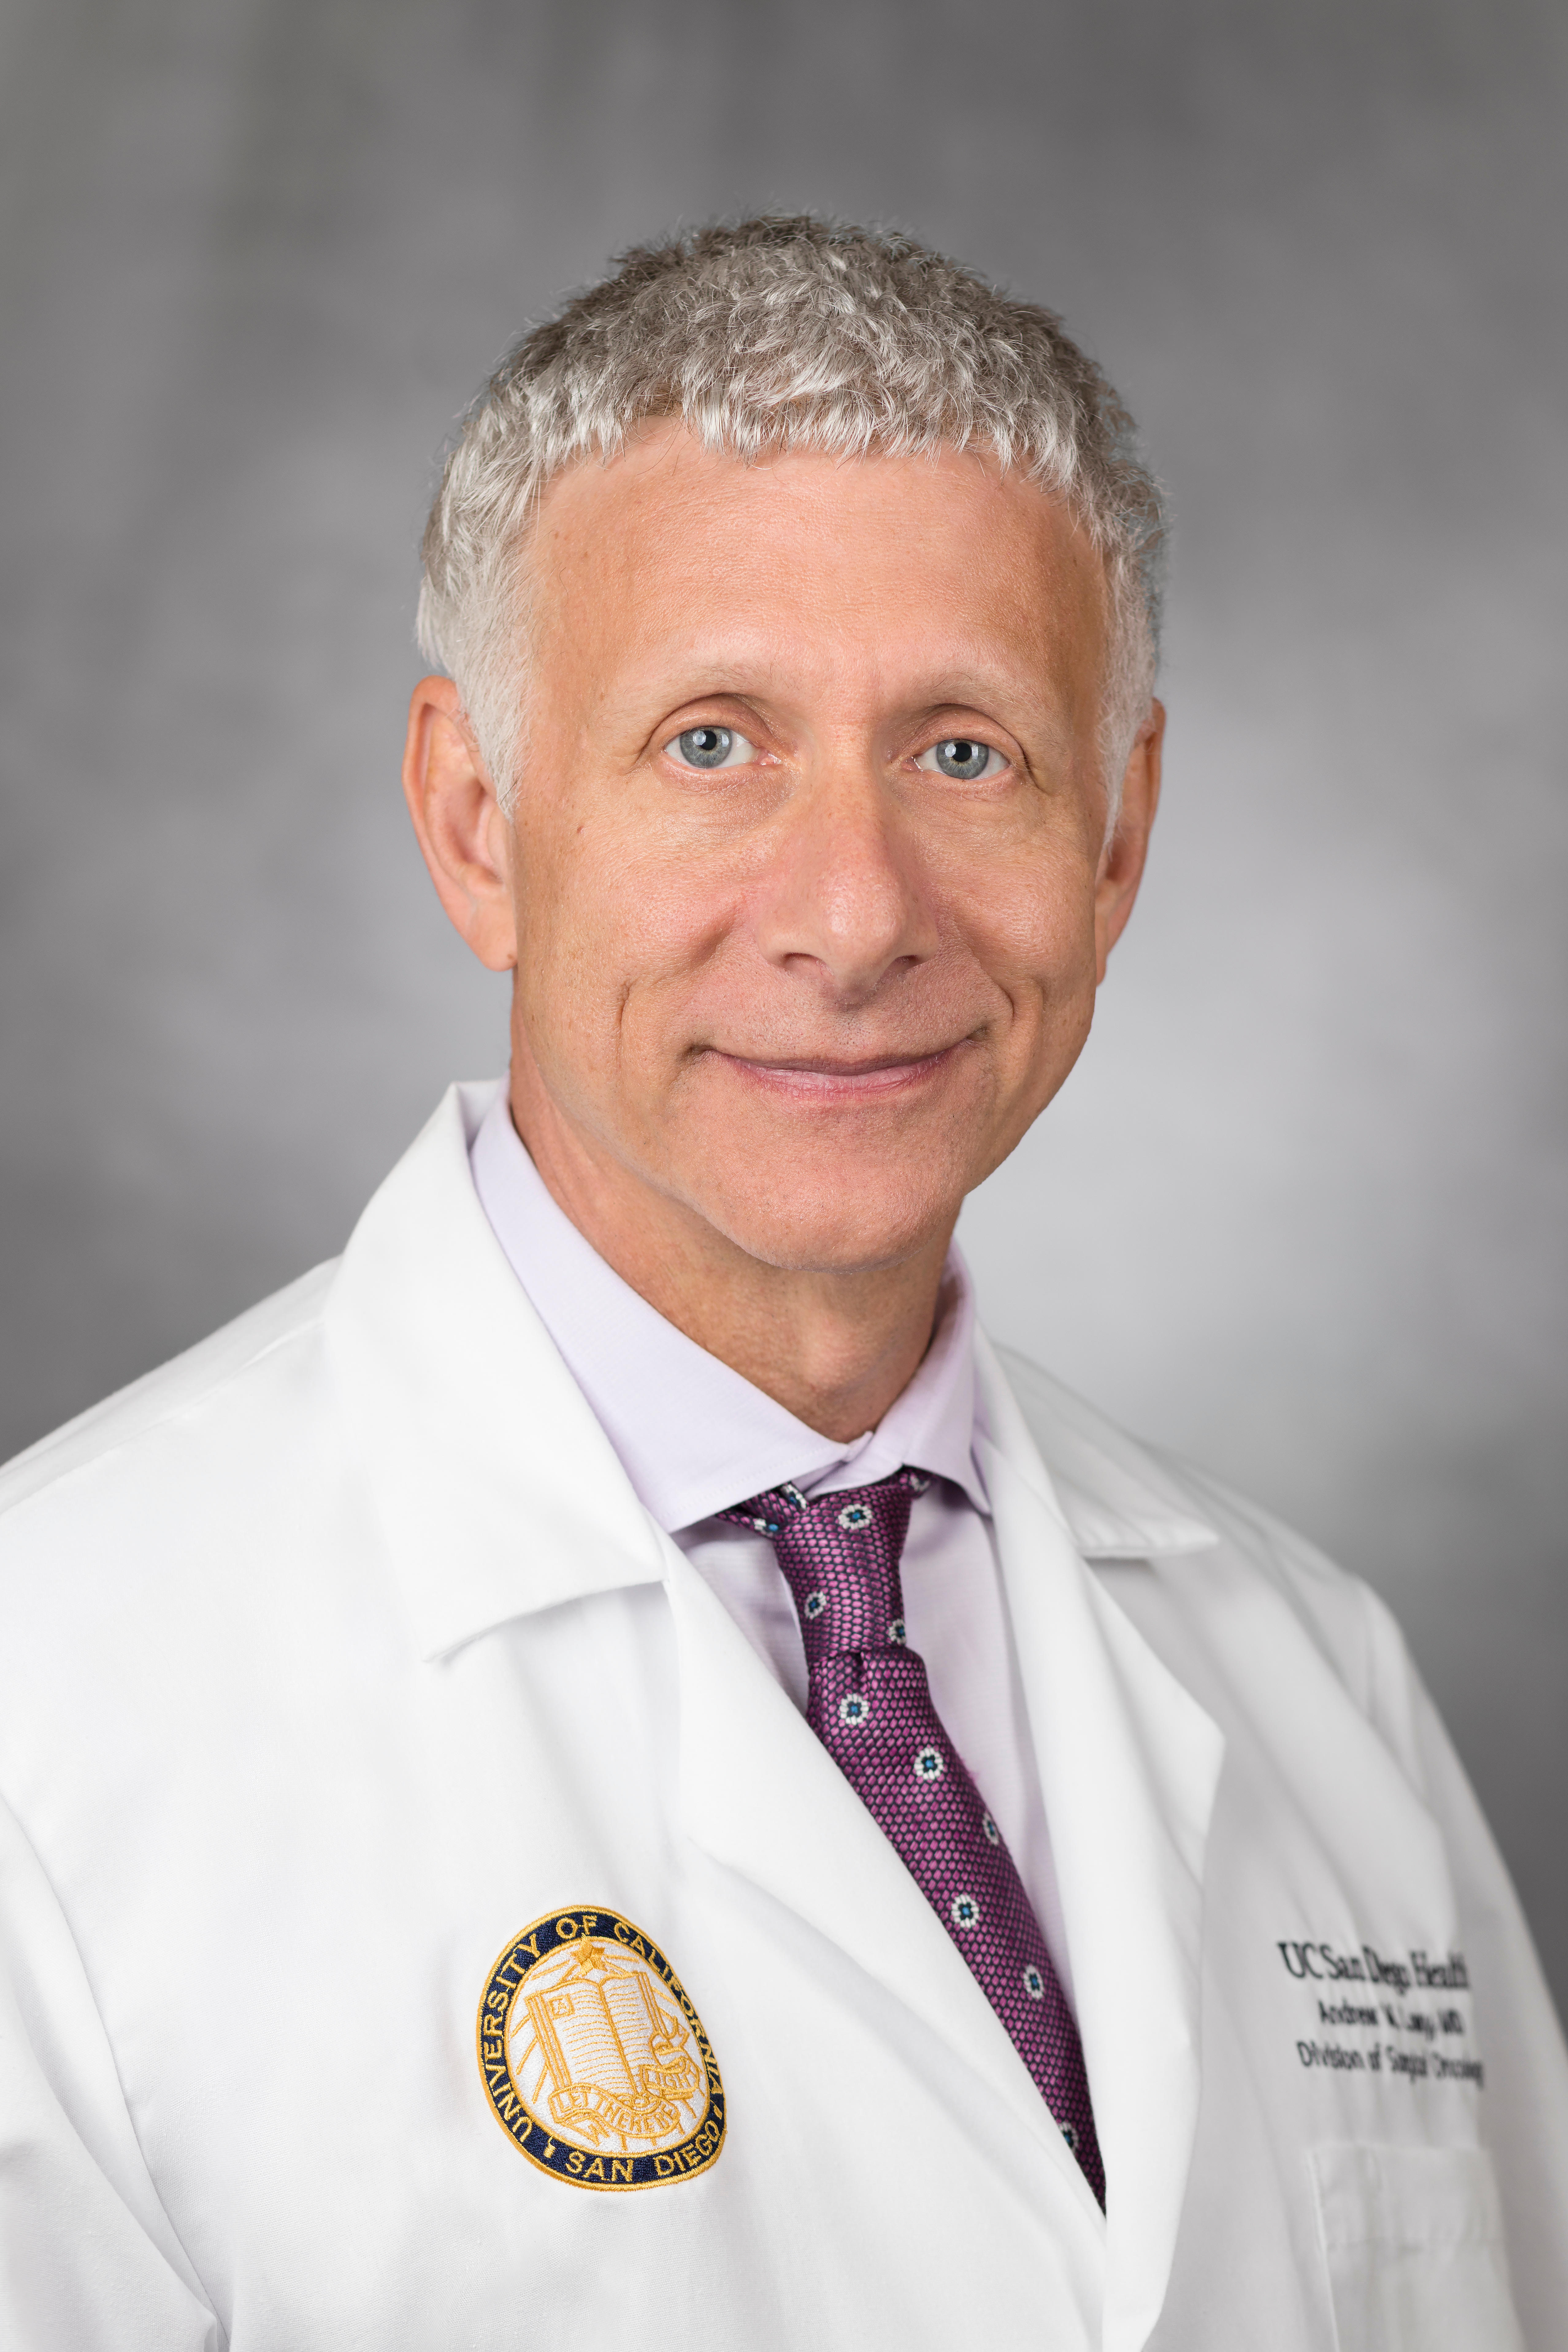 Dr. Andrew M. Lowy, MD - San Diego, CA - General Surgeon, Oncologist